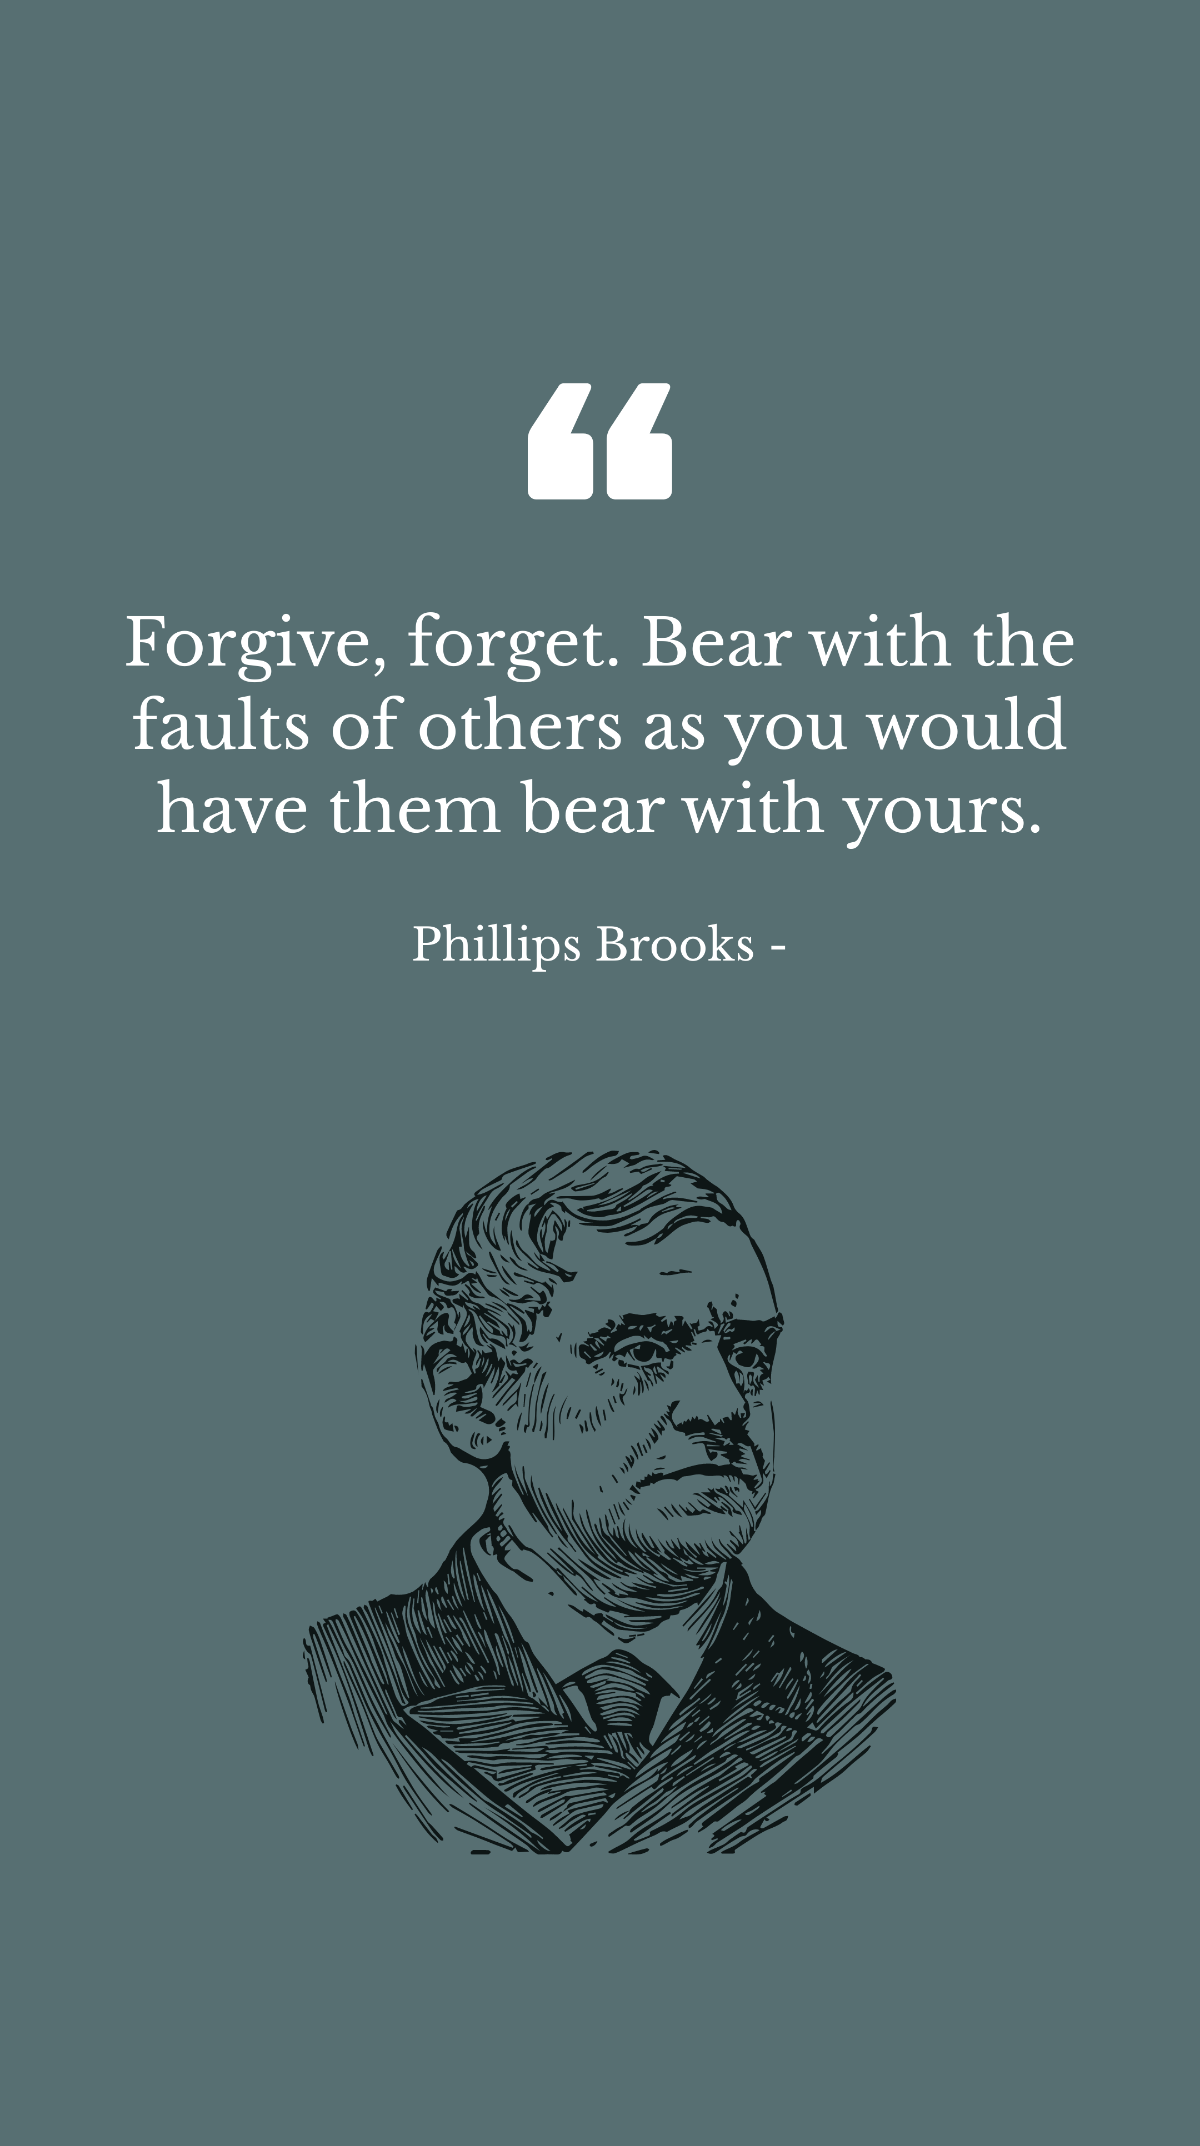 Free Phillips Brooks - Forgive, forget. Bear with the faults of others as you would have them bear with yours. Template